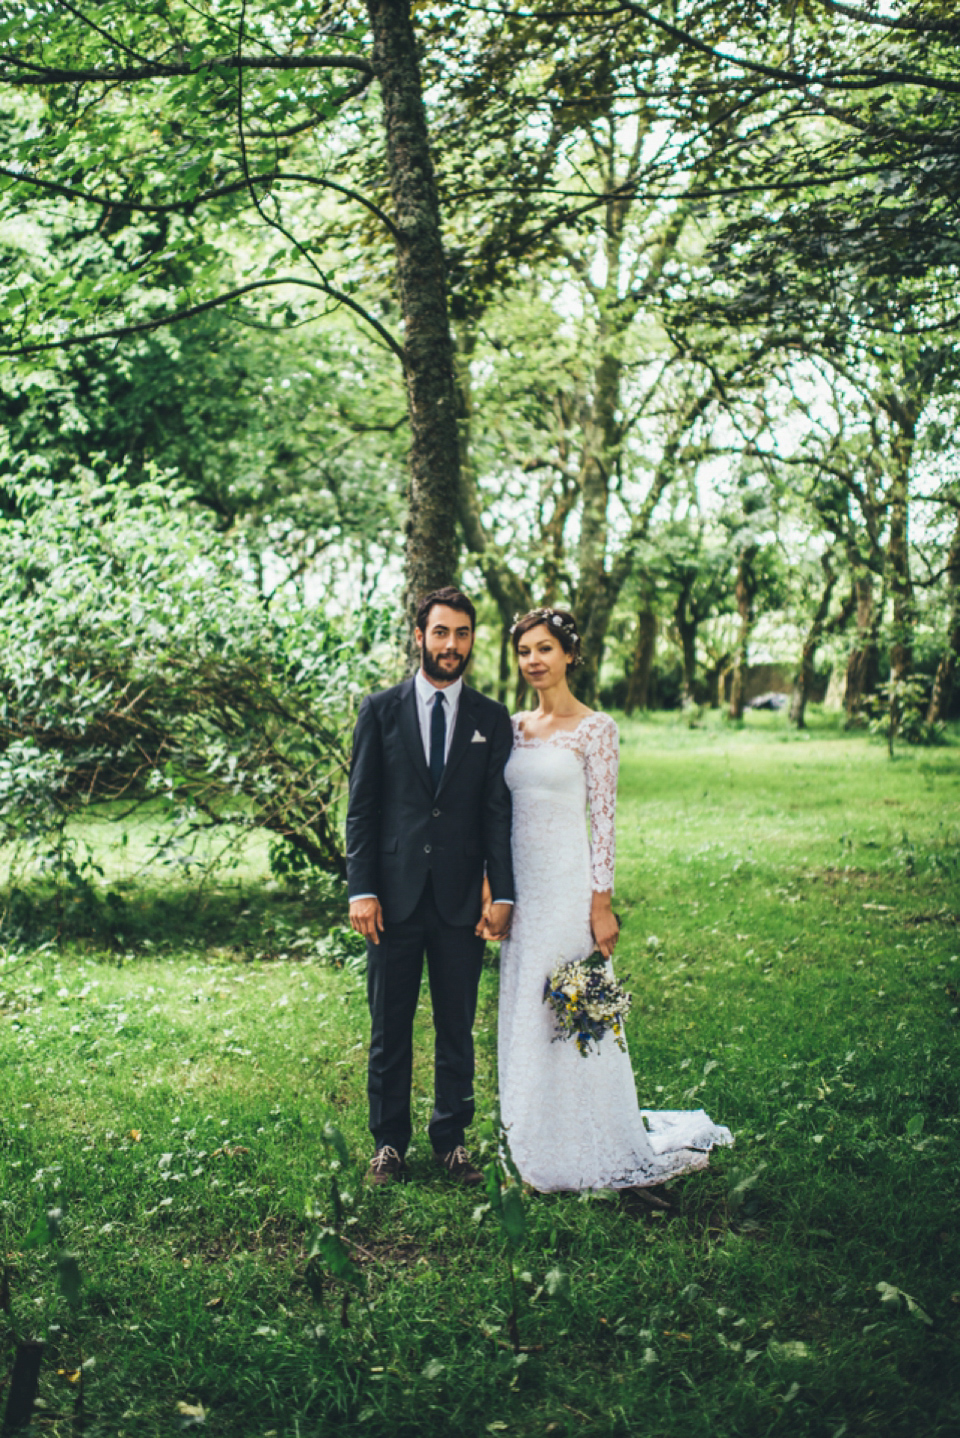 Emma wears a Temperley London gown for her wedding with 'The Travelling Barn Company' at the Skipness Estate in Scotland. Photography by Lisa Devine.